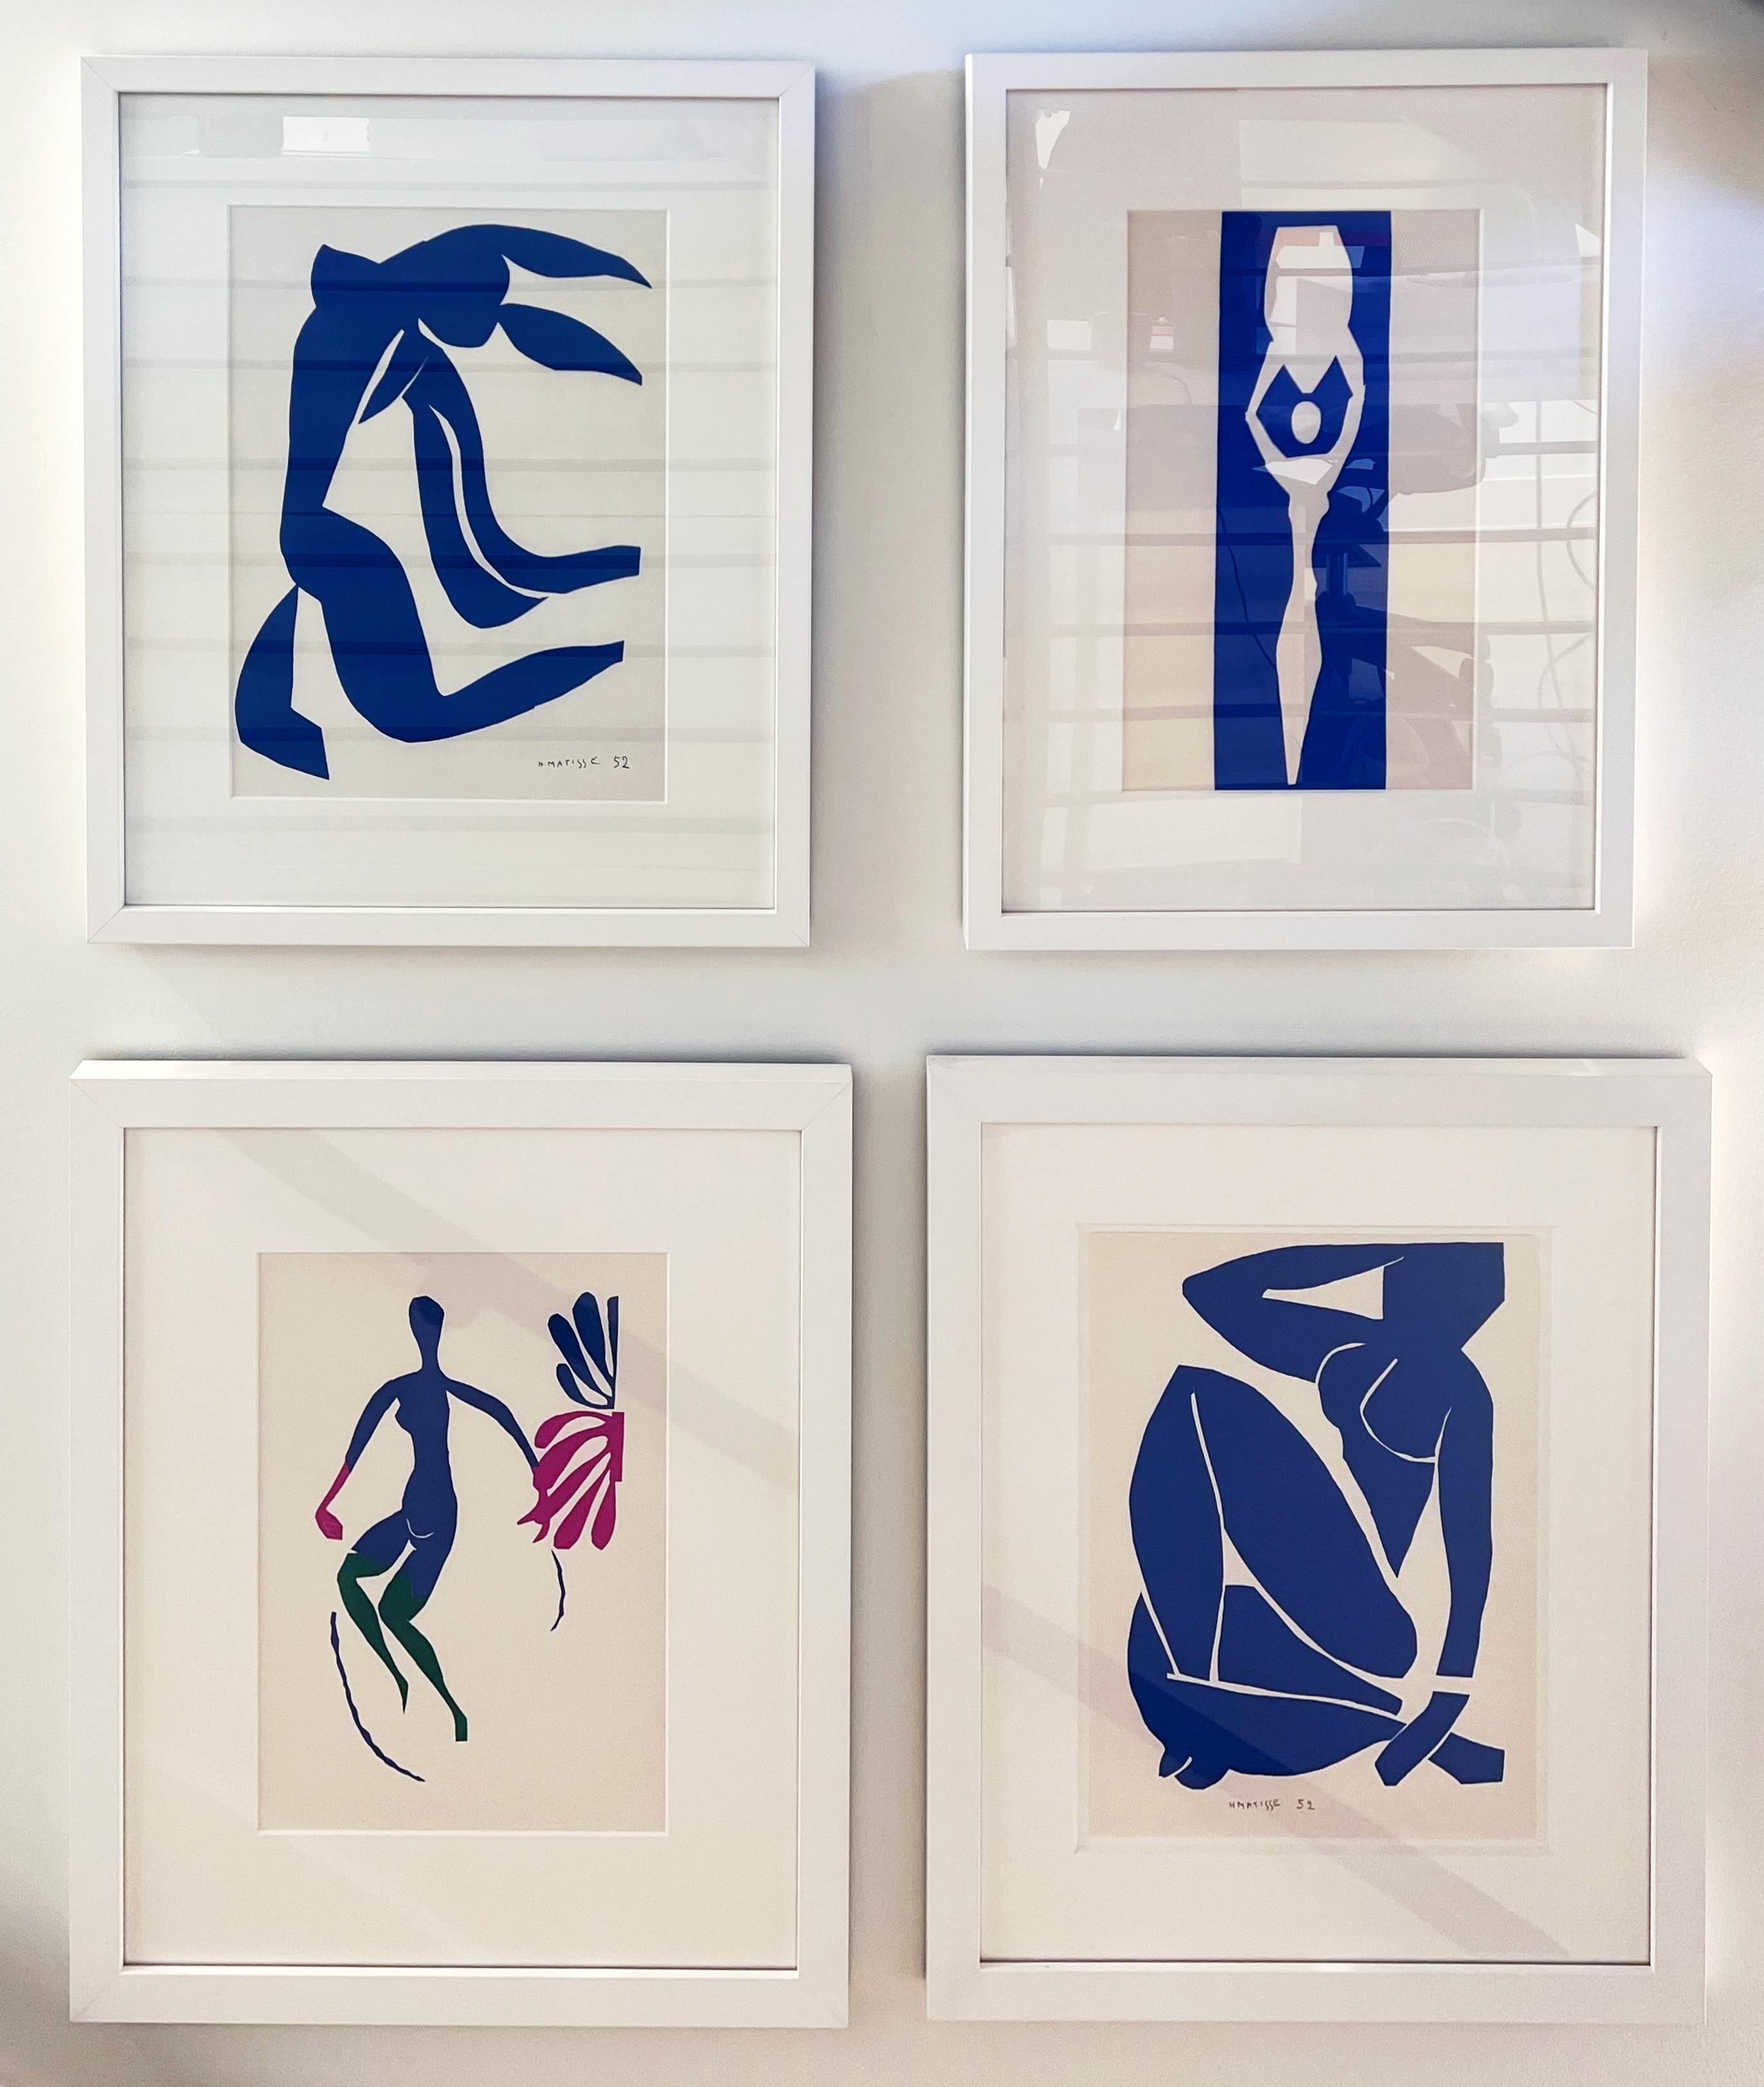 Nus Bleus VII, from 1958 The Last Works of Henri Matisse - Gray Nude Print by (after) Henri Matisse